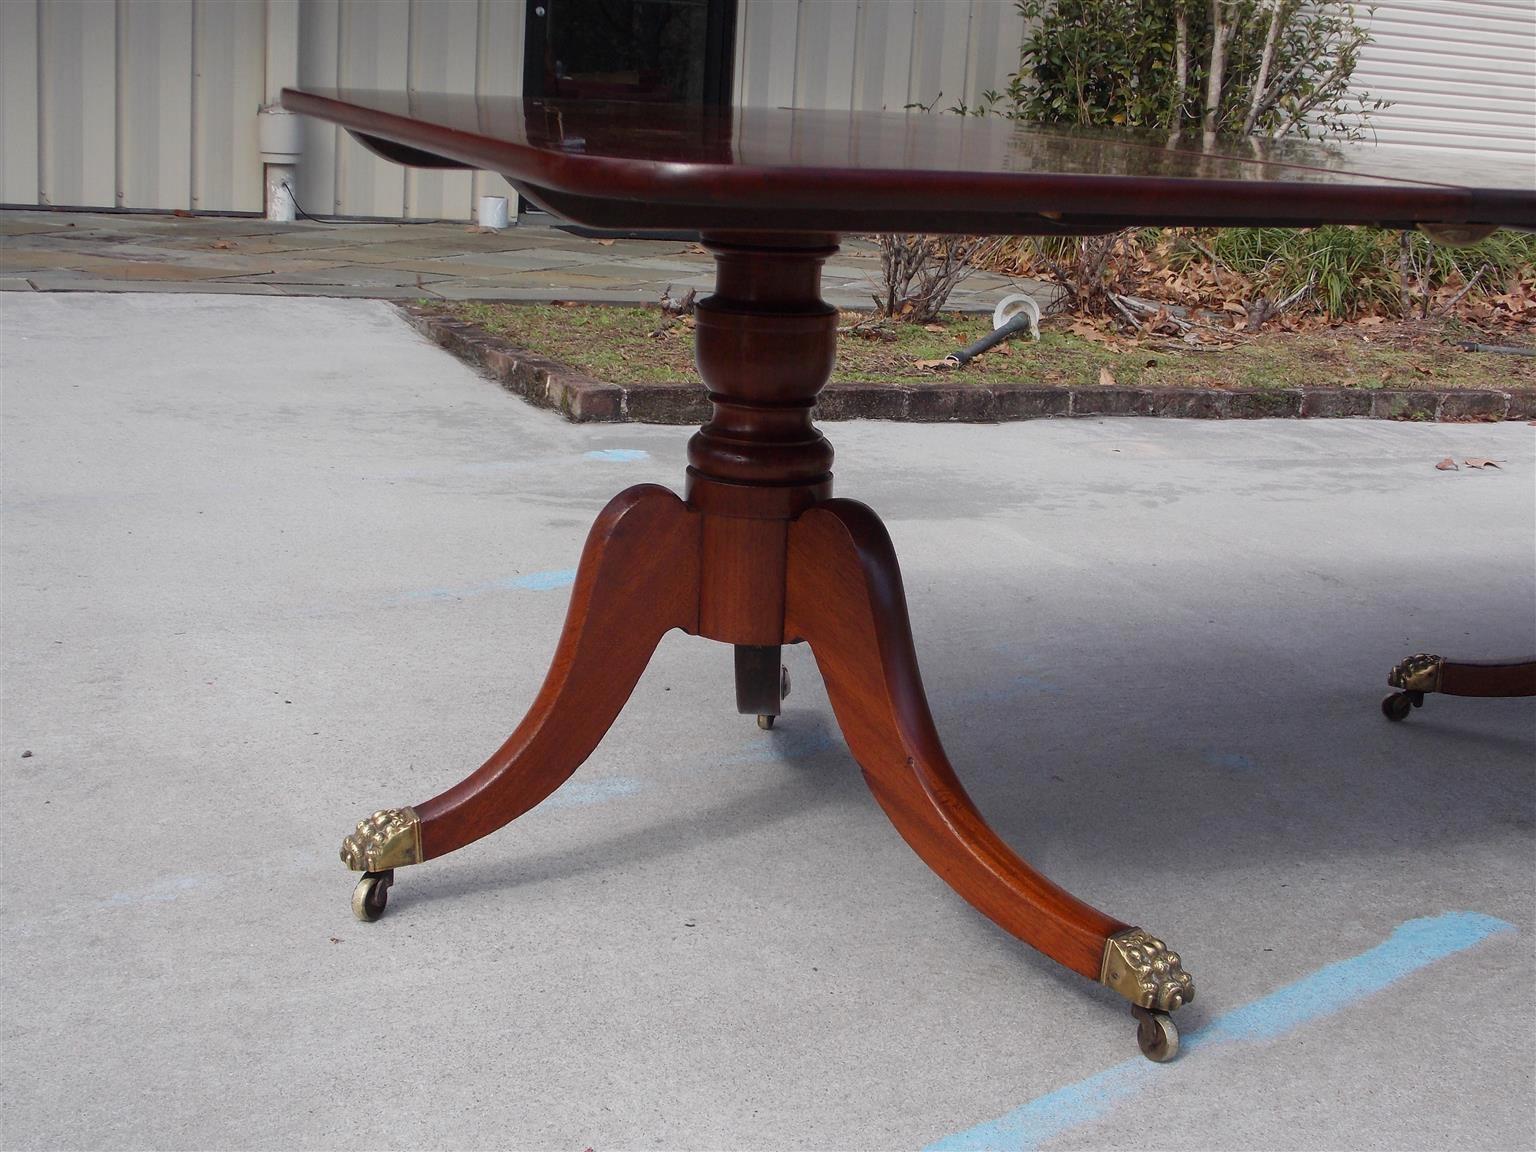 Early 19th Century English Regency Mahogany Triple Pedestal Dining Room Table with Casters, C. 1810